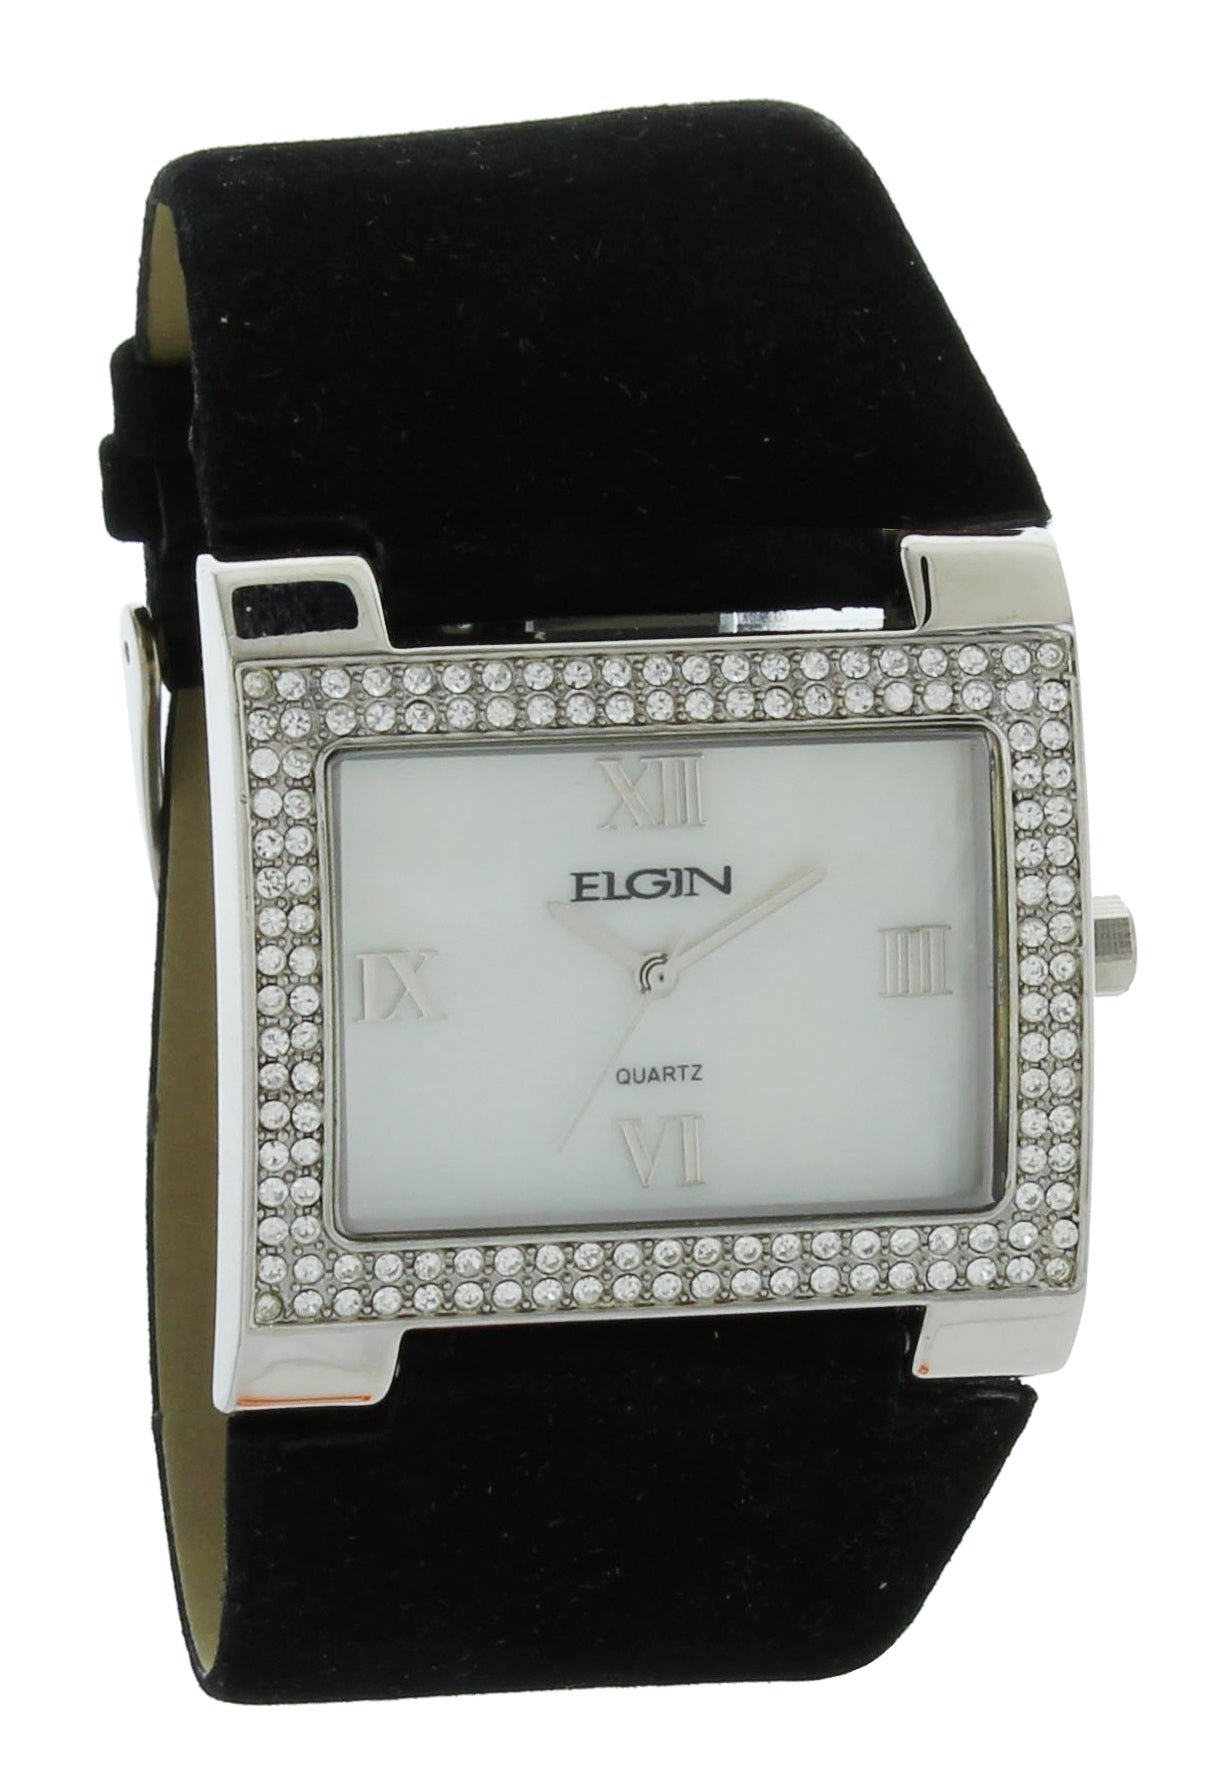 Model: Women's Elgin Watch with Stone Case and White Dial with Black Suede Strap